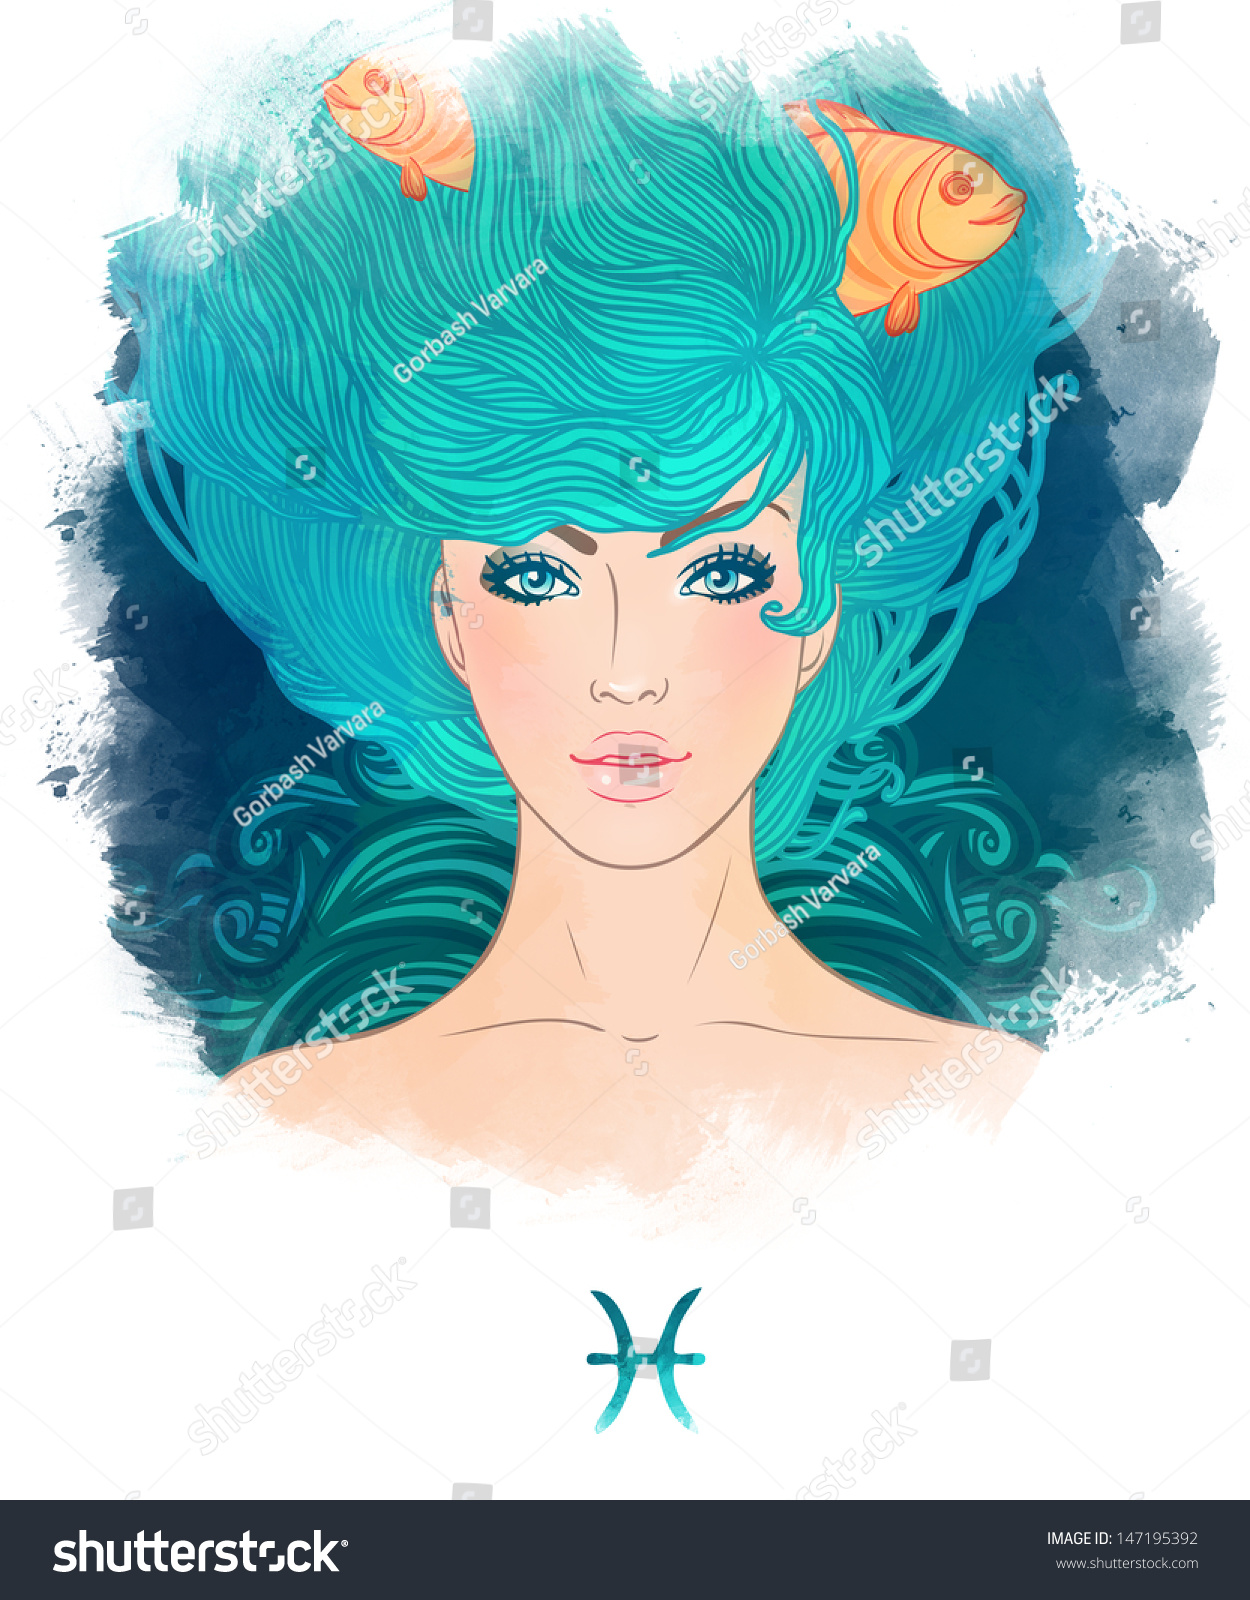 Illustration Of Pisces Astrological Sign As A Beautiful Girl ...